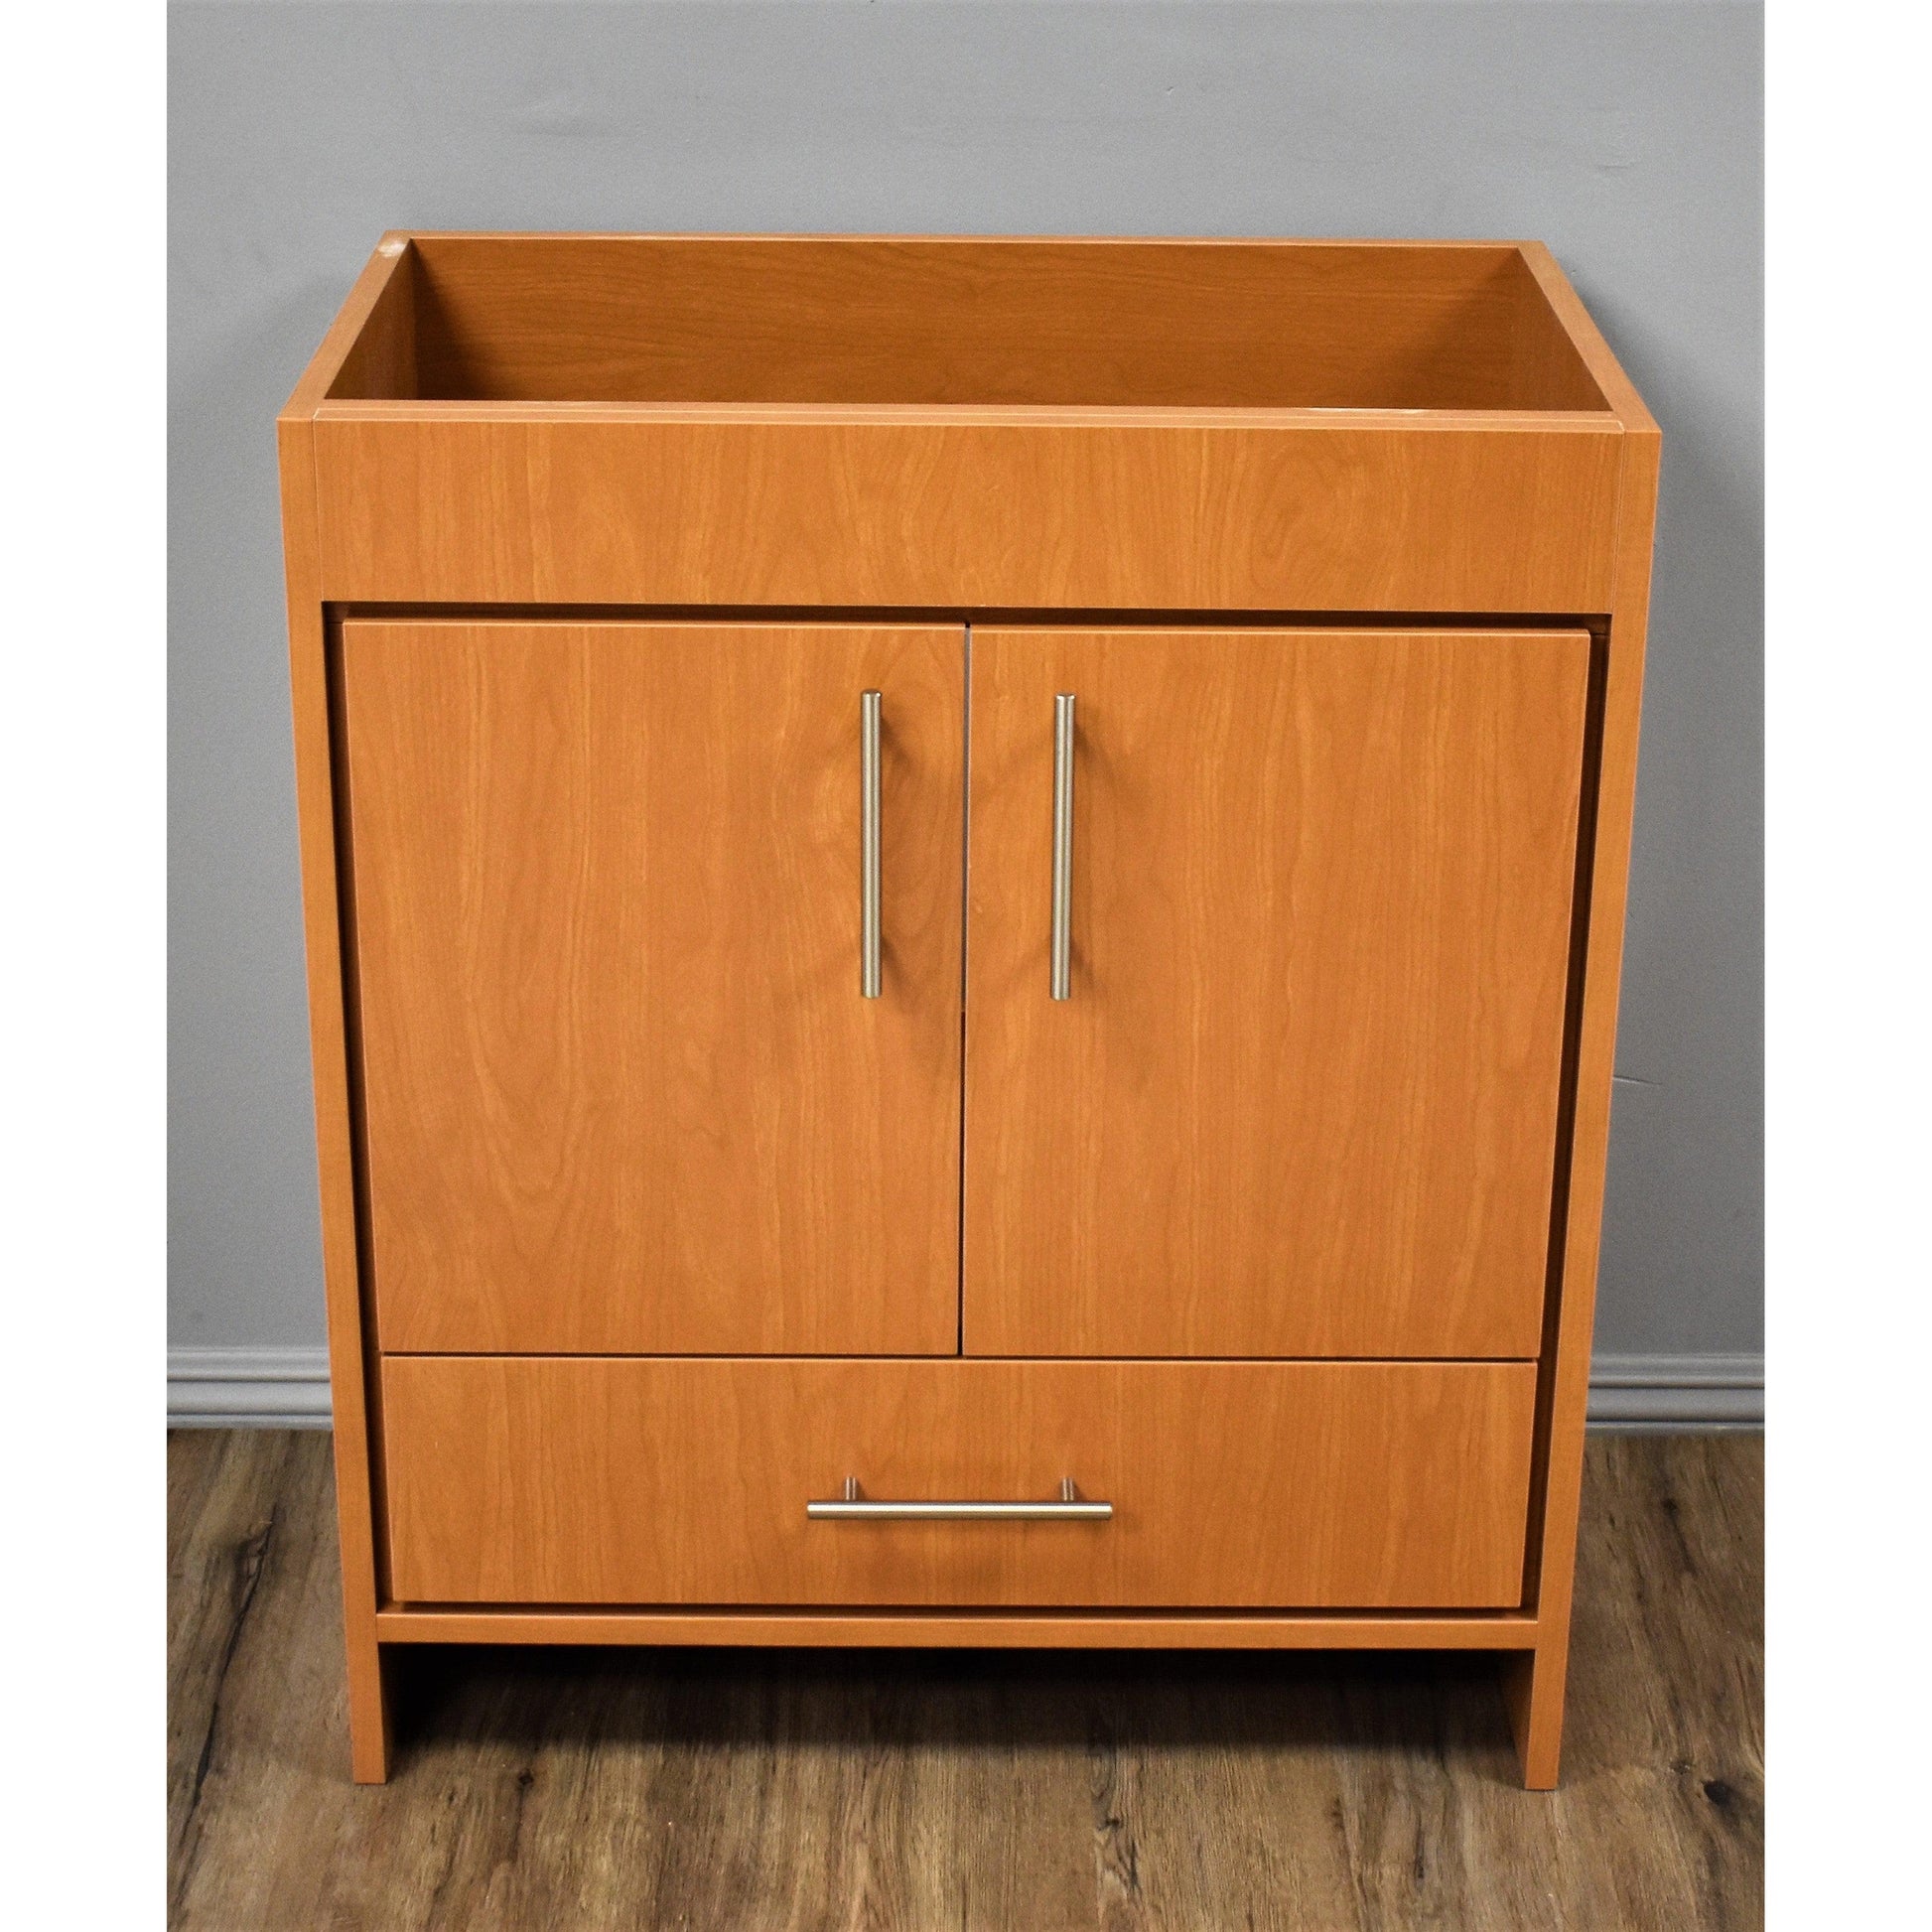 Volpa USA Pacific 30" Honey Maple Freestanding Modern Bathroom Vanity With Brushed Nickel Round Handles Cabinet Only